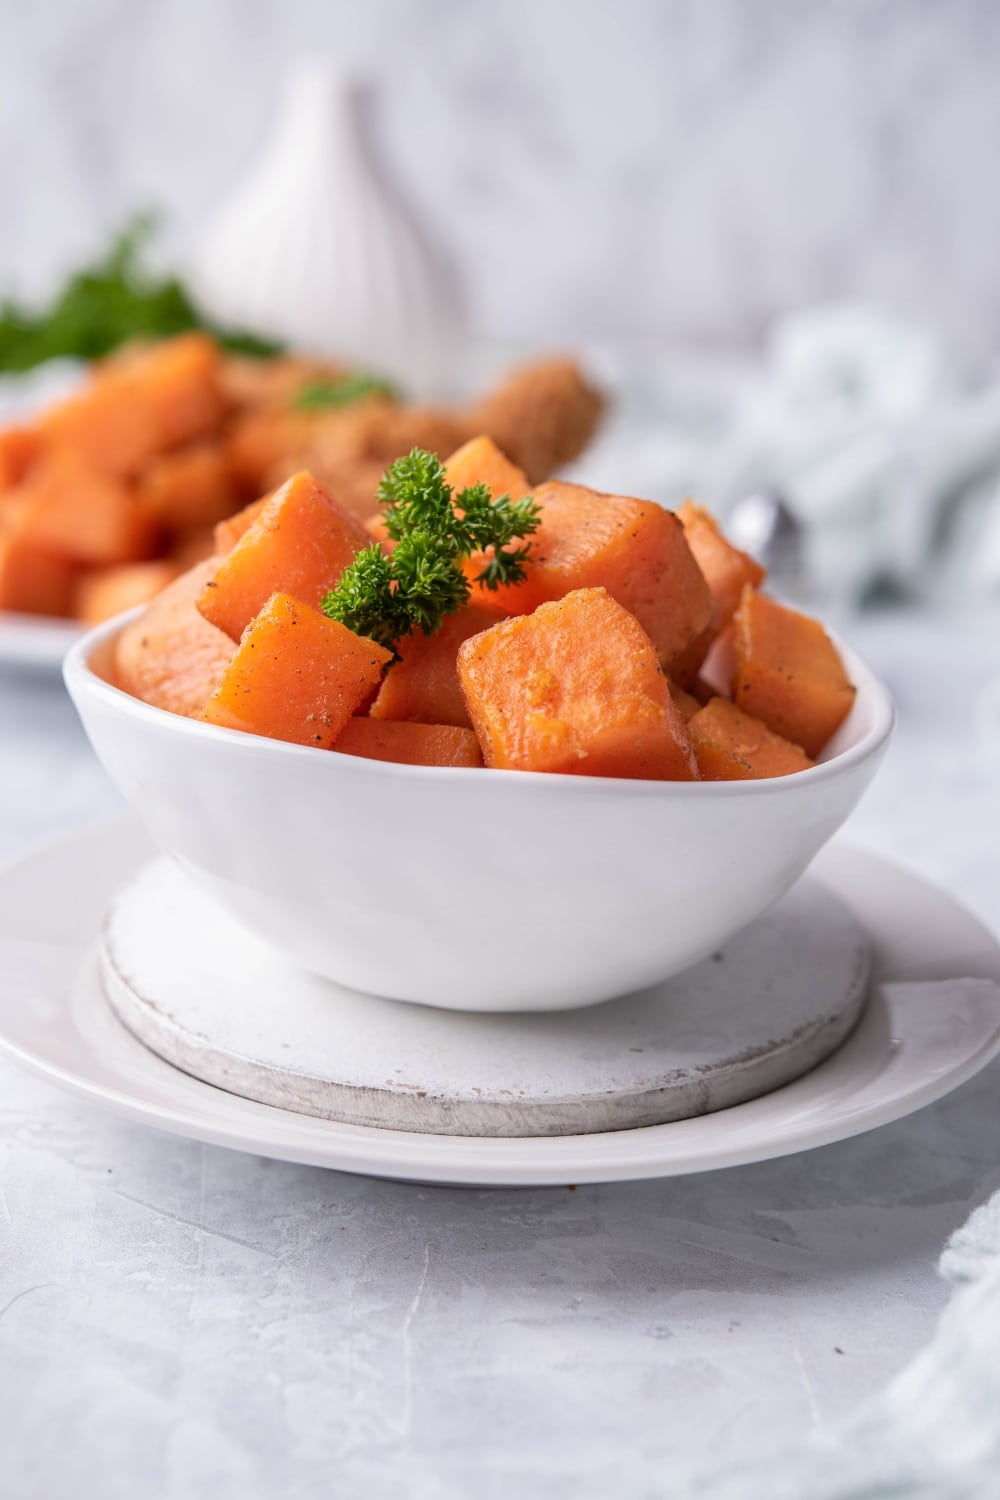 Sauteed sweet potato cubes garnished with curly parsley in a small white bowl over a white plate. Behind it is a plate of more sauteed sweet potatoes with fried chicken.